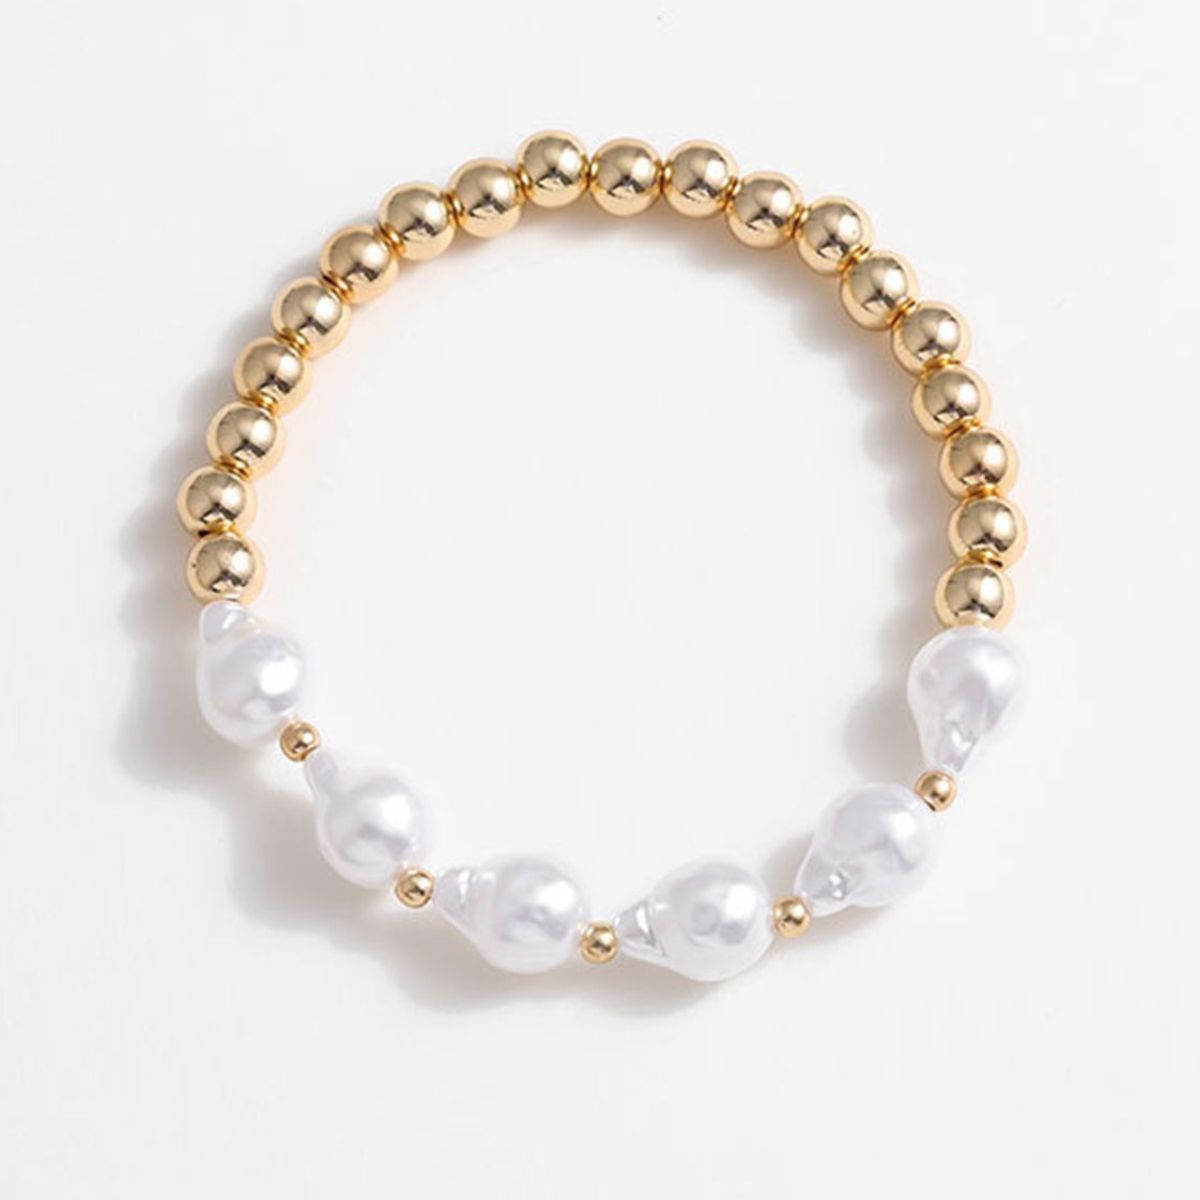 Gold-Plated Alloy Bead Bracelet - Thandynie